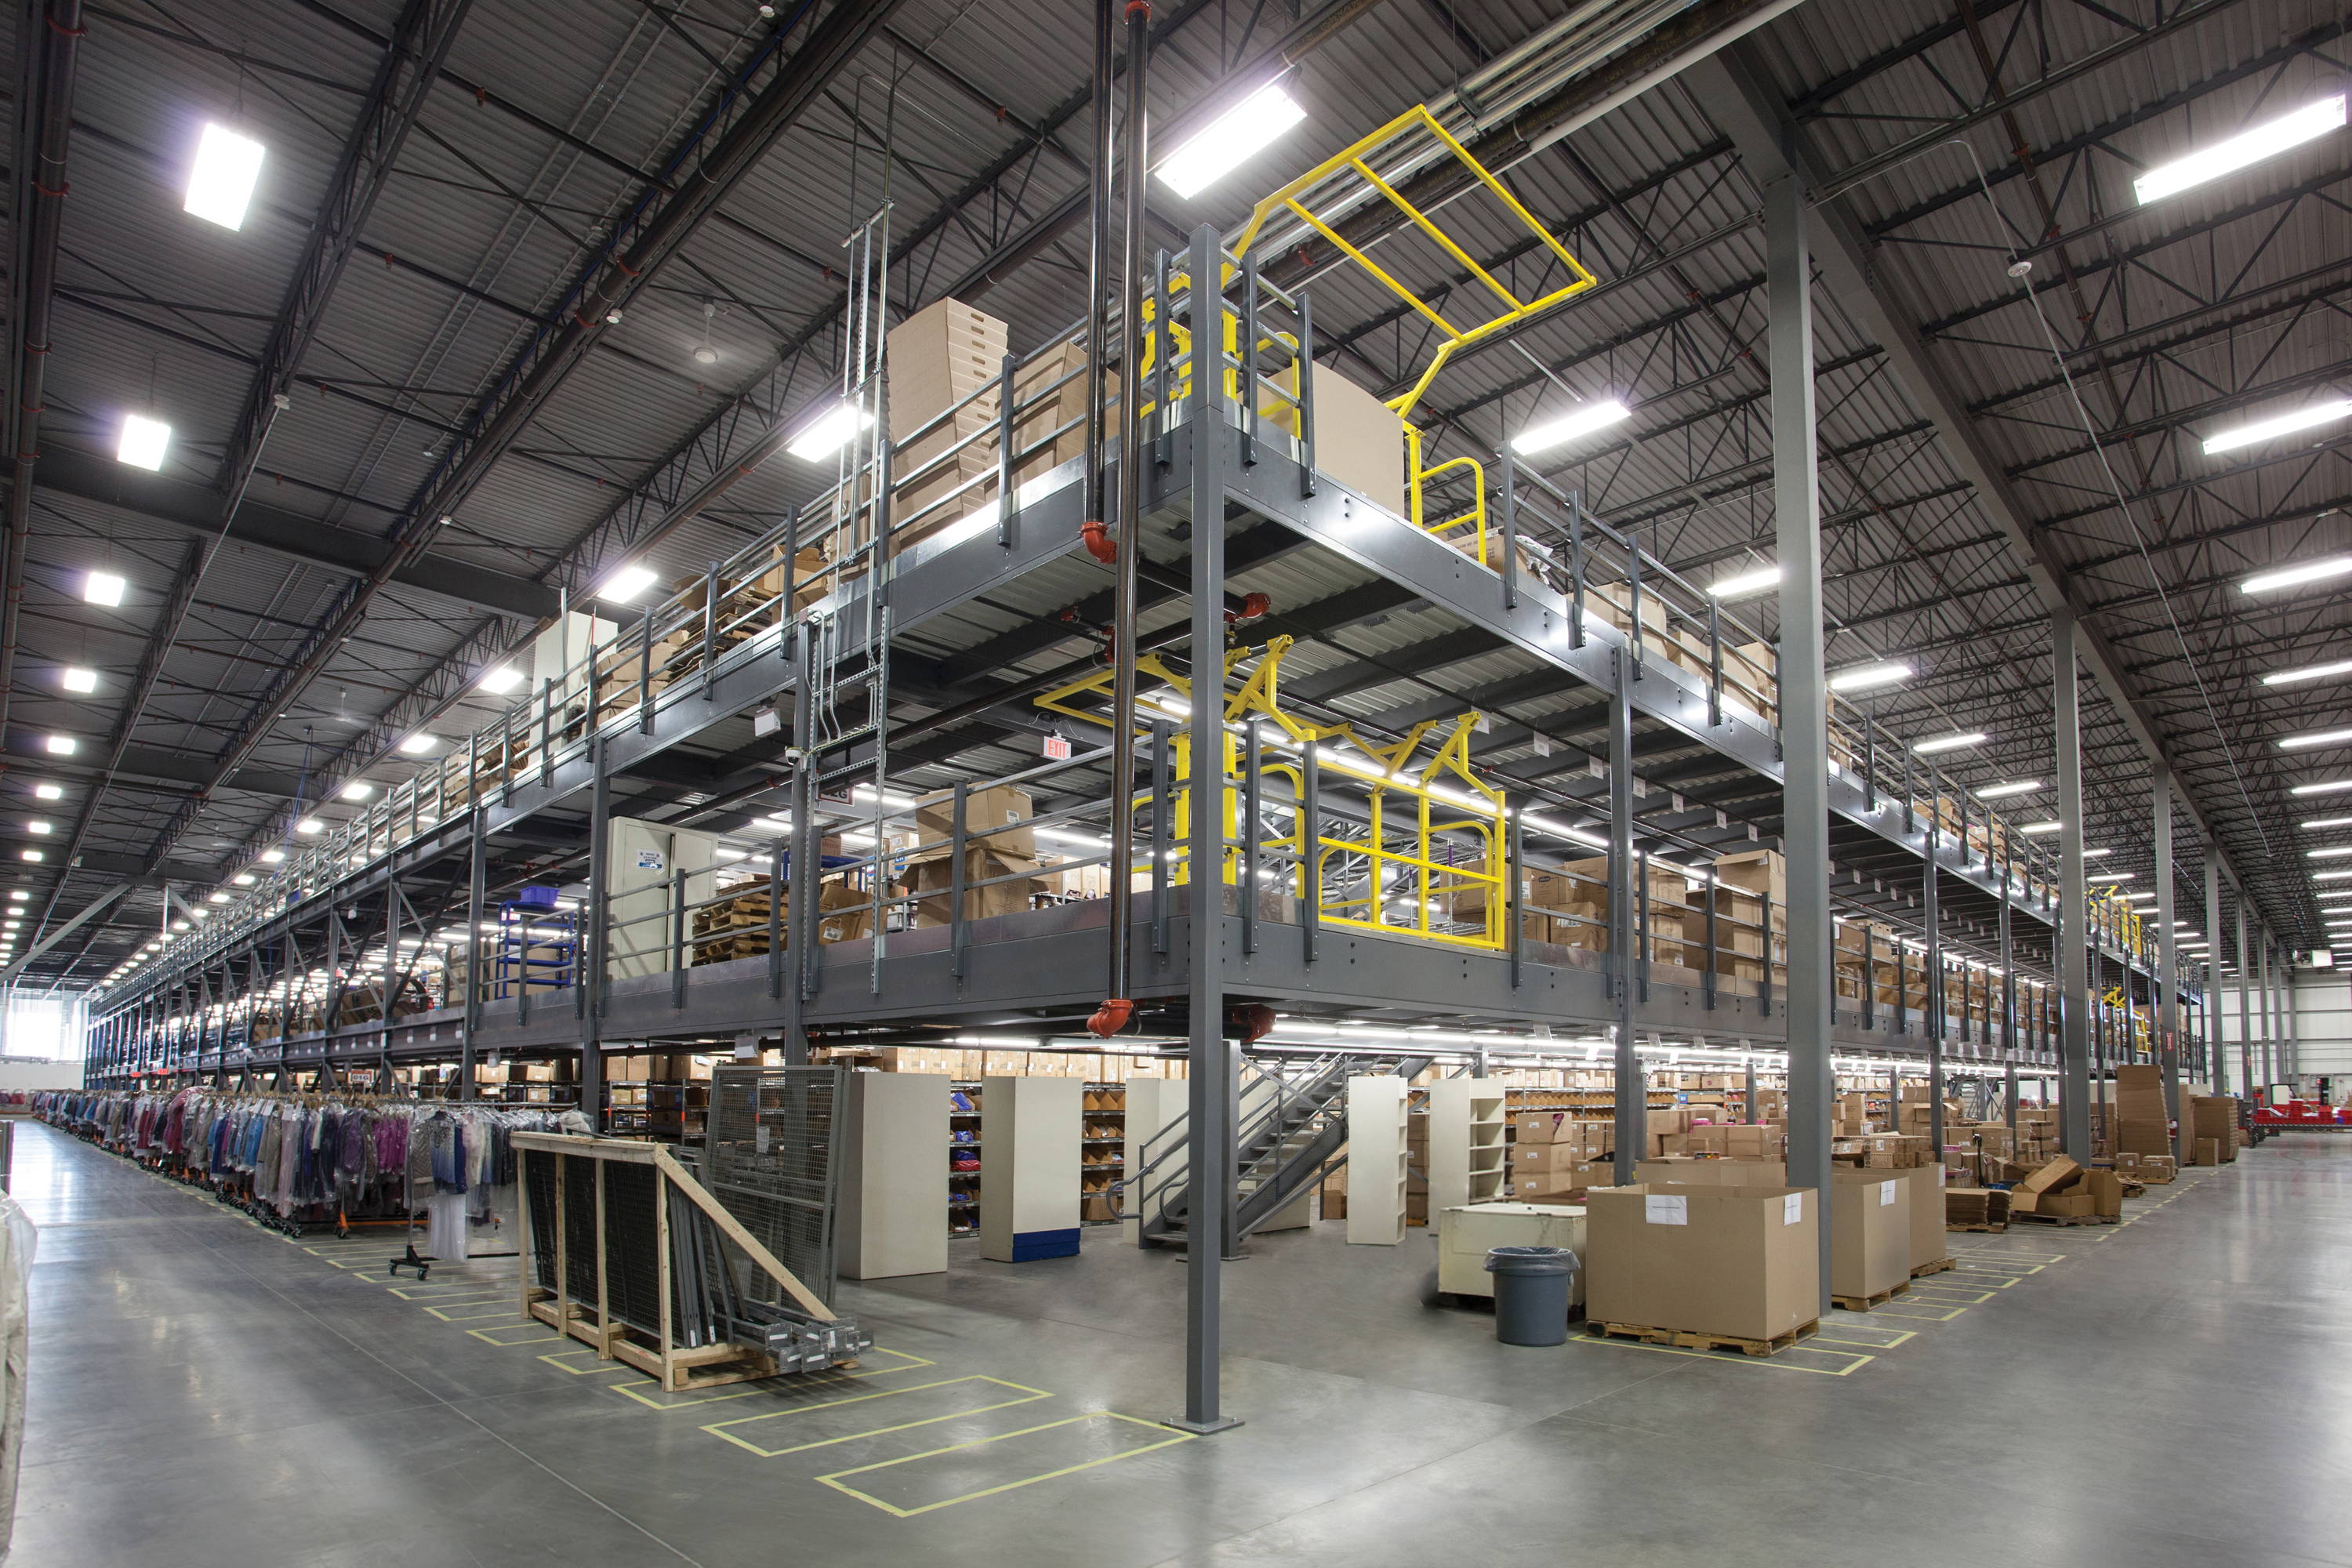 Large, two-story mezzanine with a mezzanine gate on each floor. Used in a warehouse for extra storage. LED Lighting installed on each level of the mezzanine.